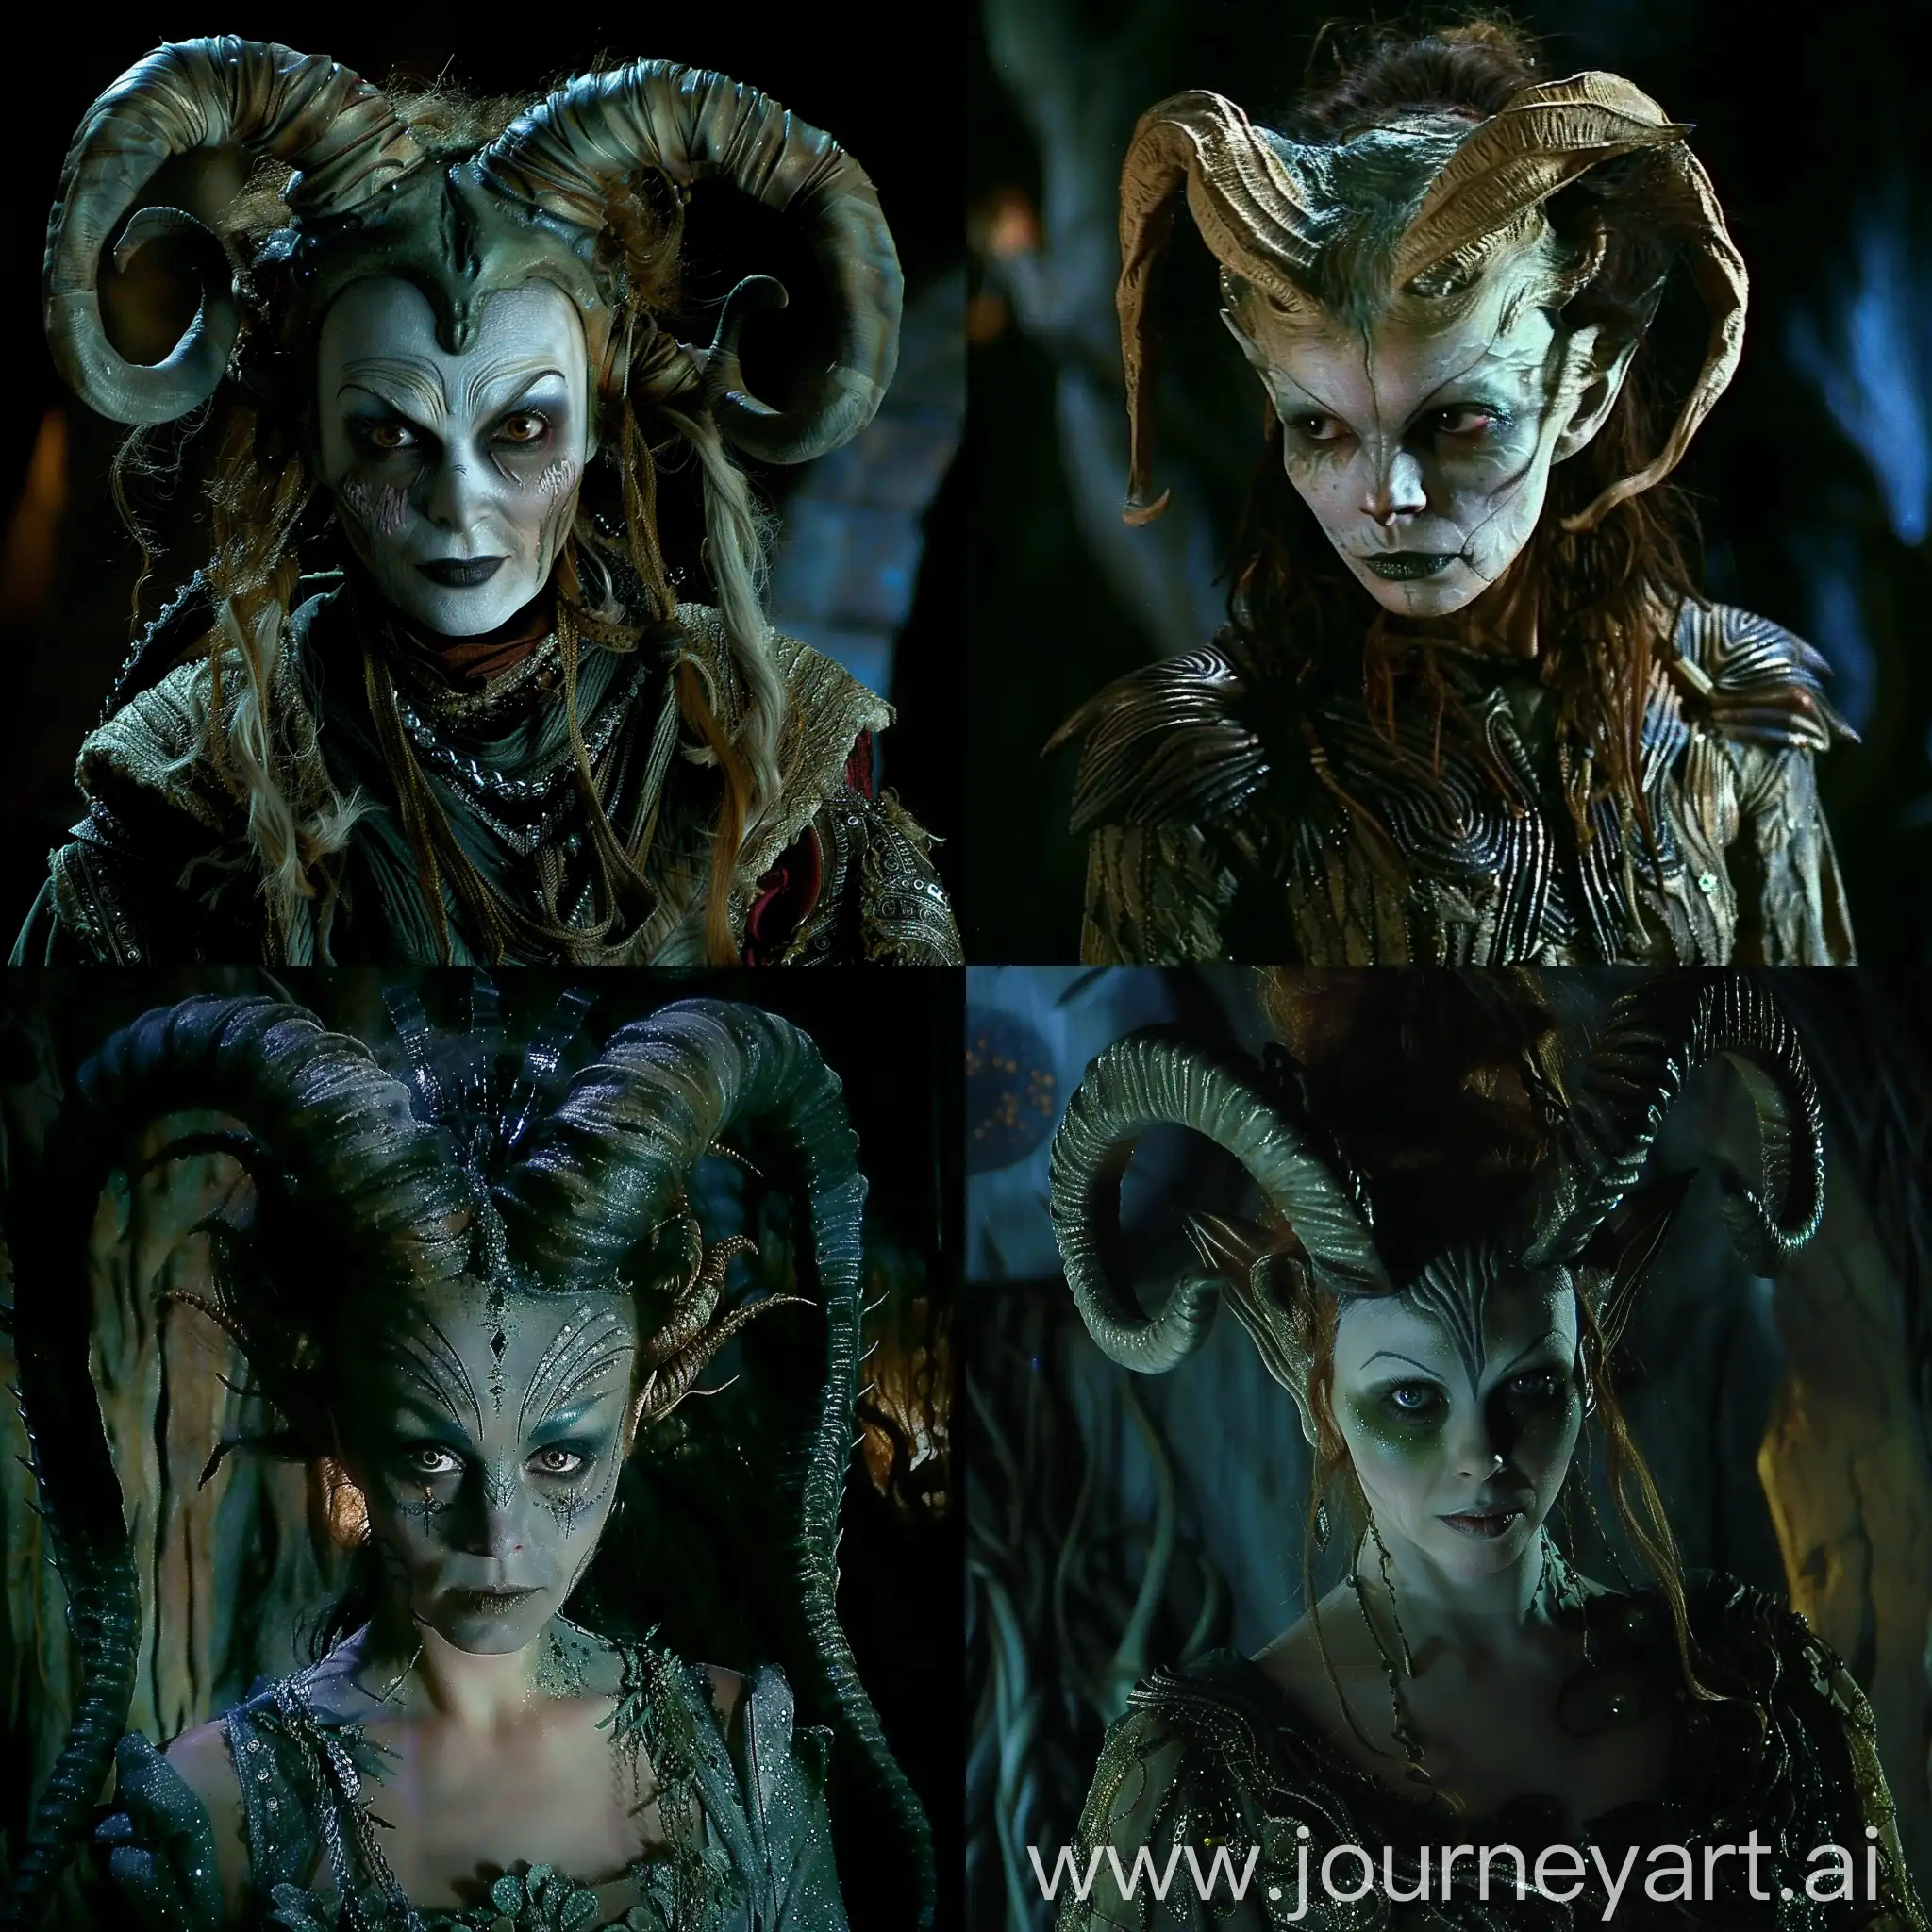 Sinister-Witch-in-Pans-Labyrinth-Style-Makeup-Dark-Fantasy-Horror-Art